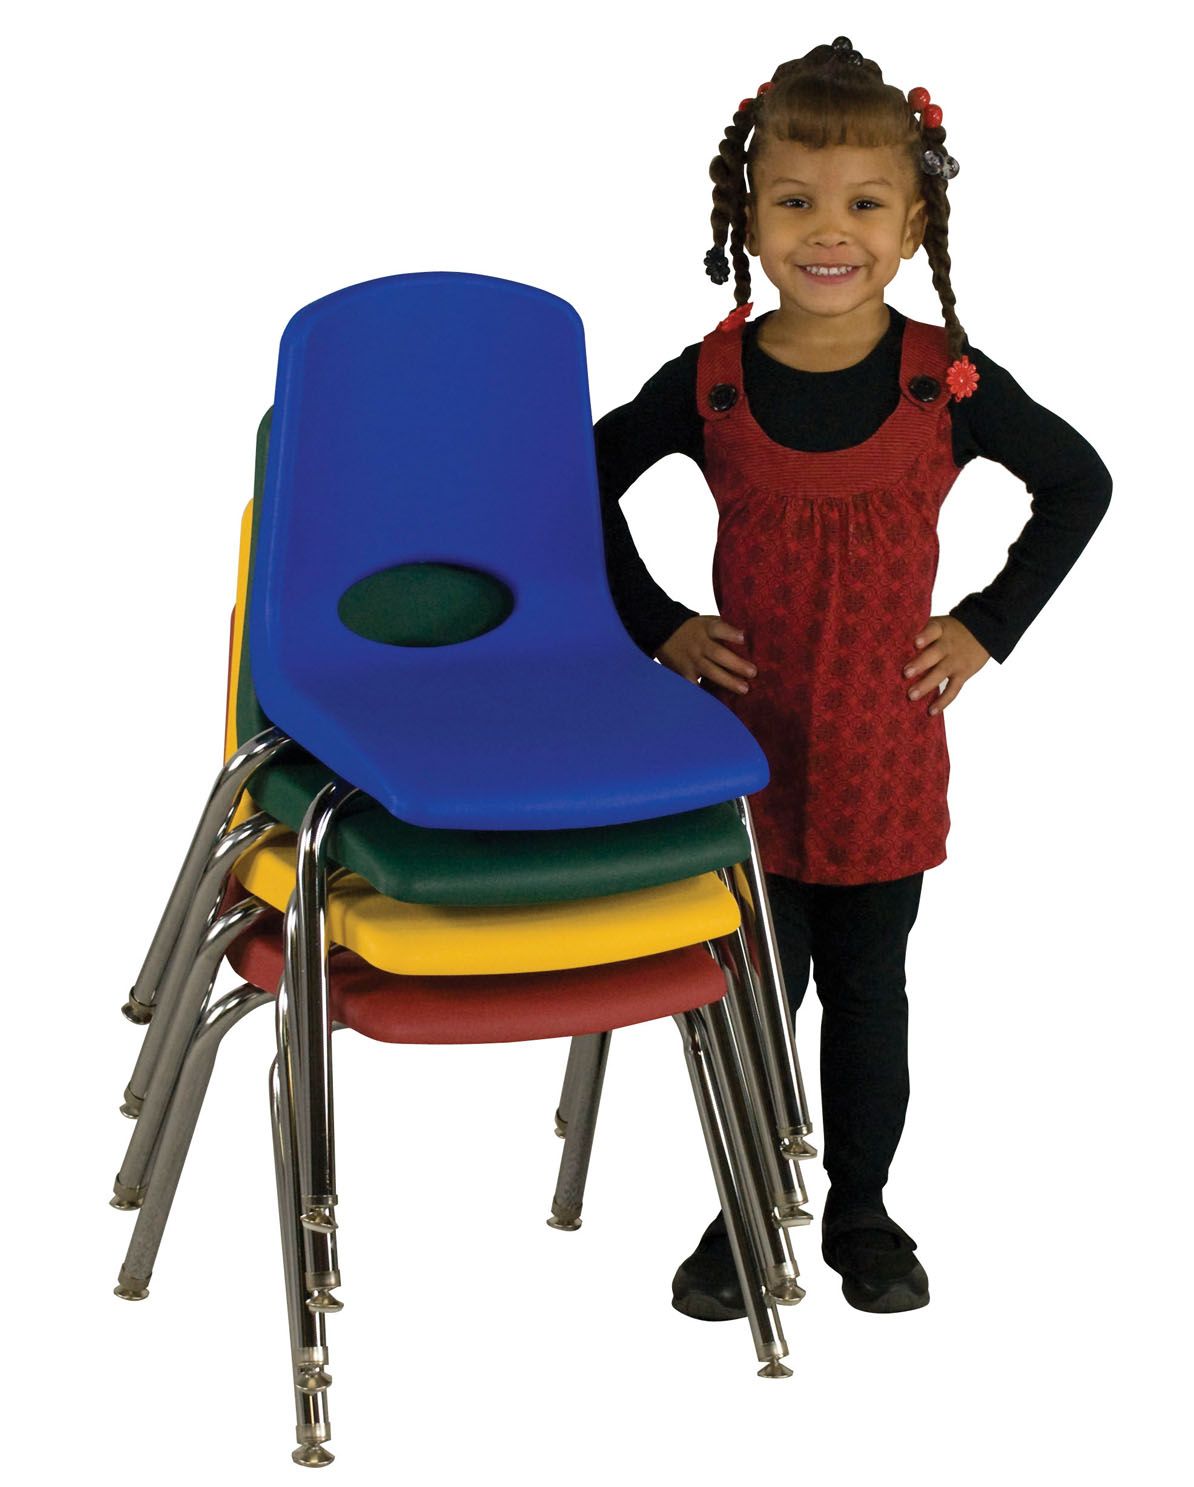 description innovative school stack chair features a molded seat with